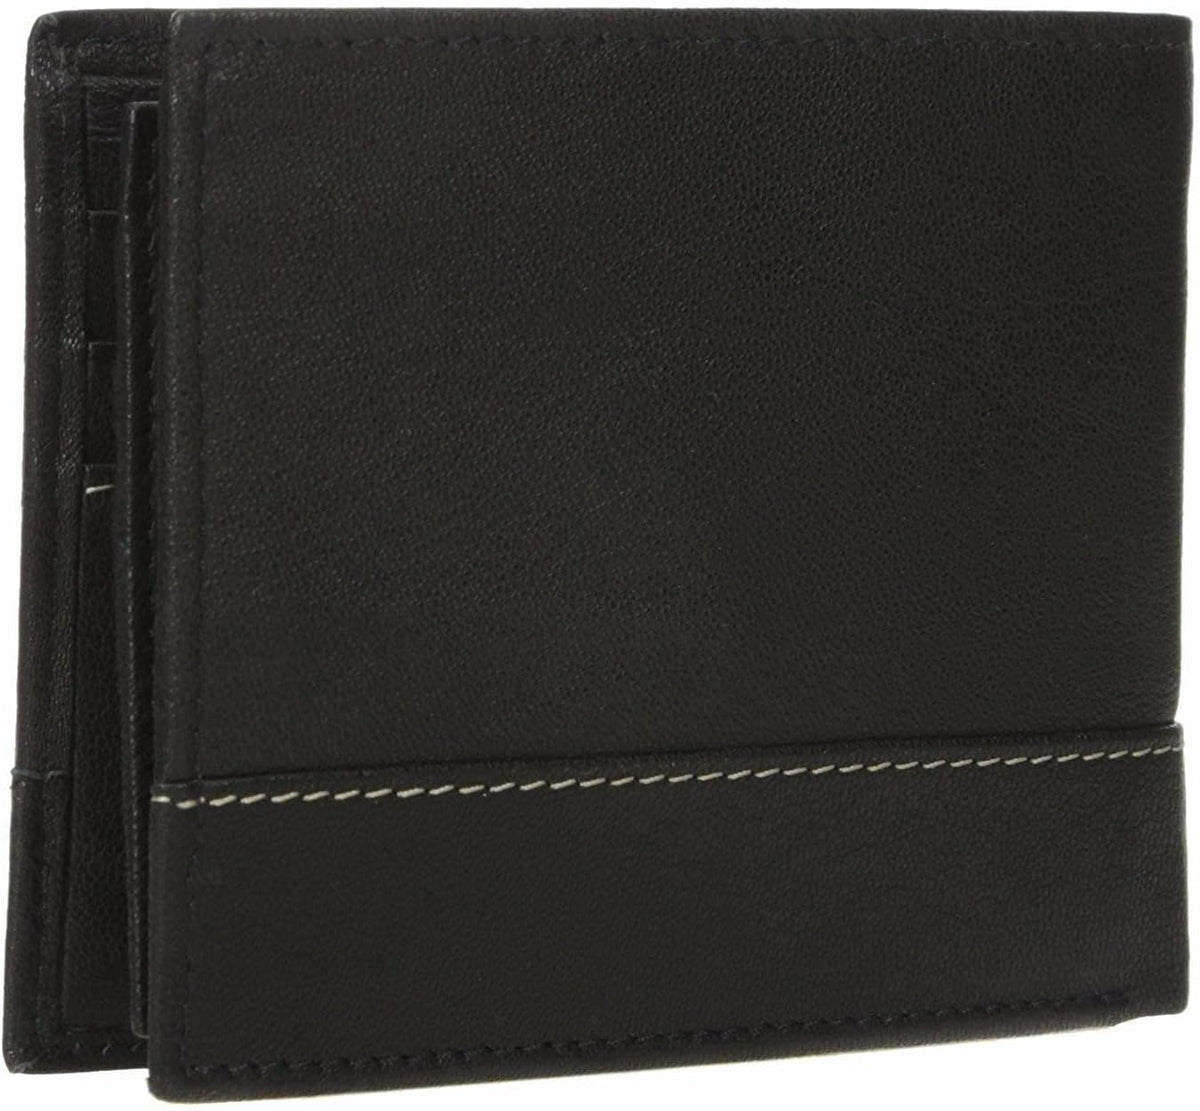 Guess Chico Men's Distressed Leather Slim Billfold Bifold Wallet